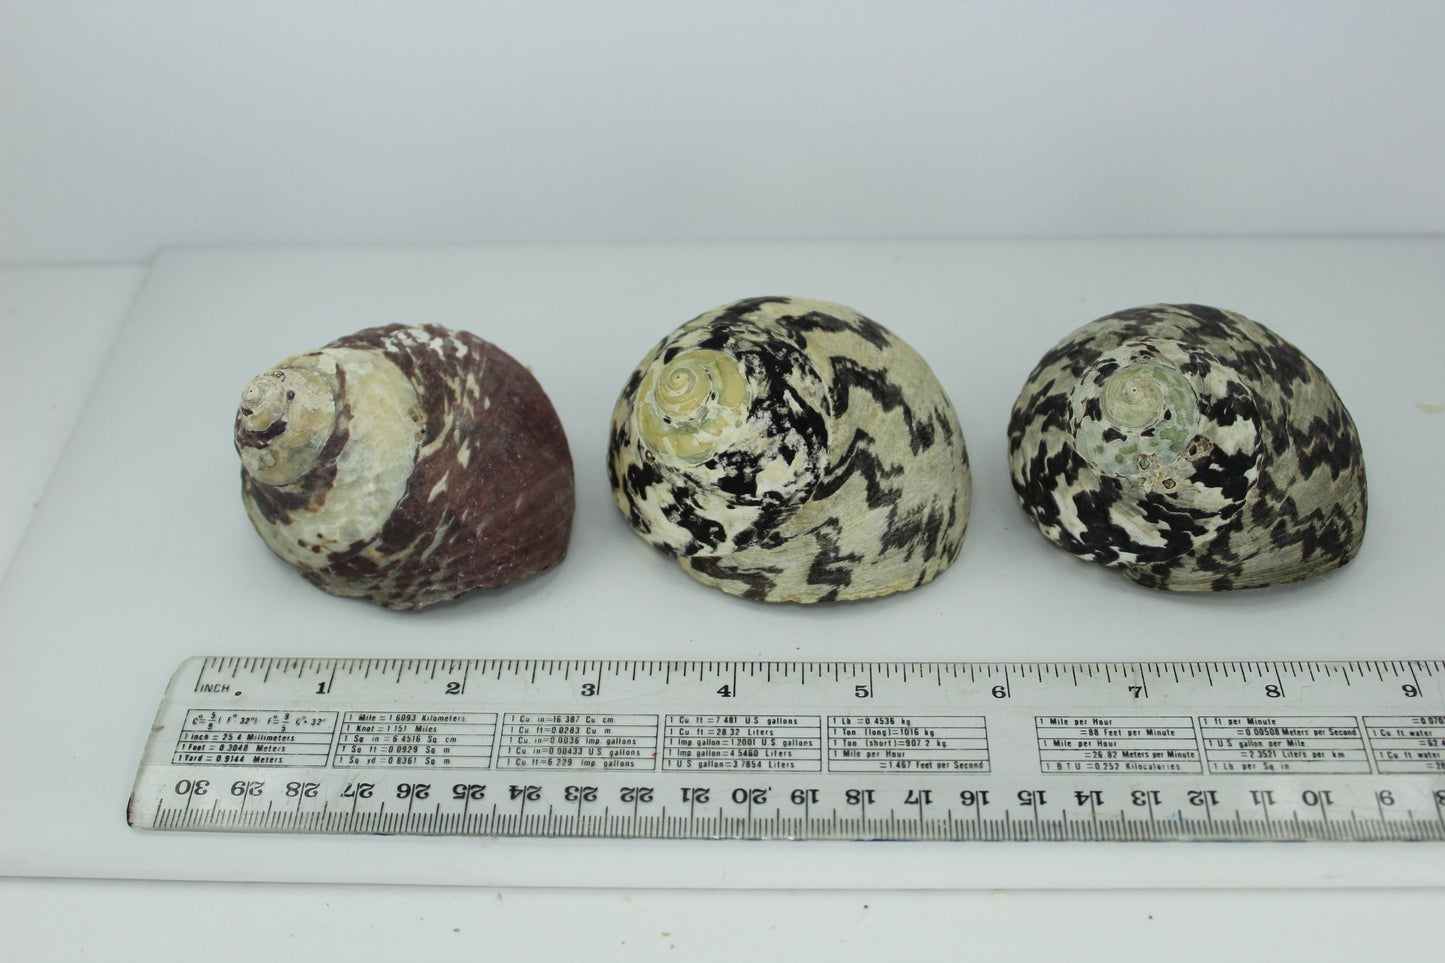 Florida 3 Vintage Turbo Magpie Natural Shells 3"  2 3/4" Operculums Estate Collection Shell Art Collectibles  large